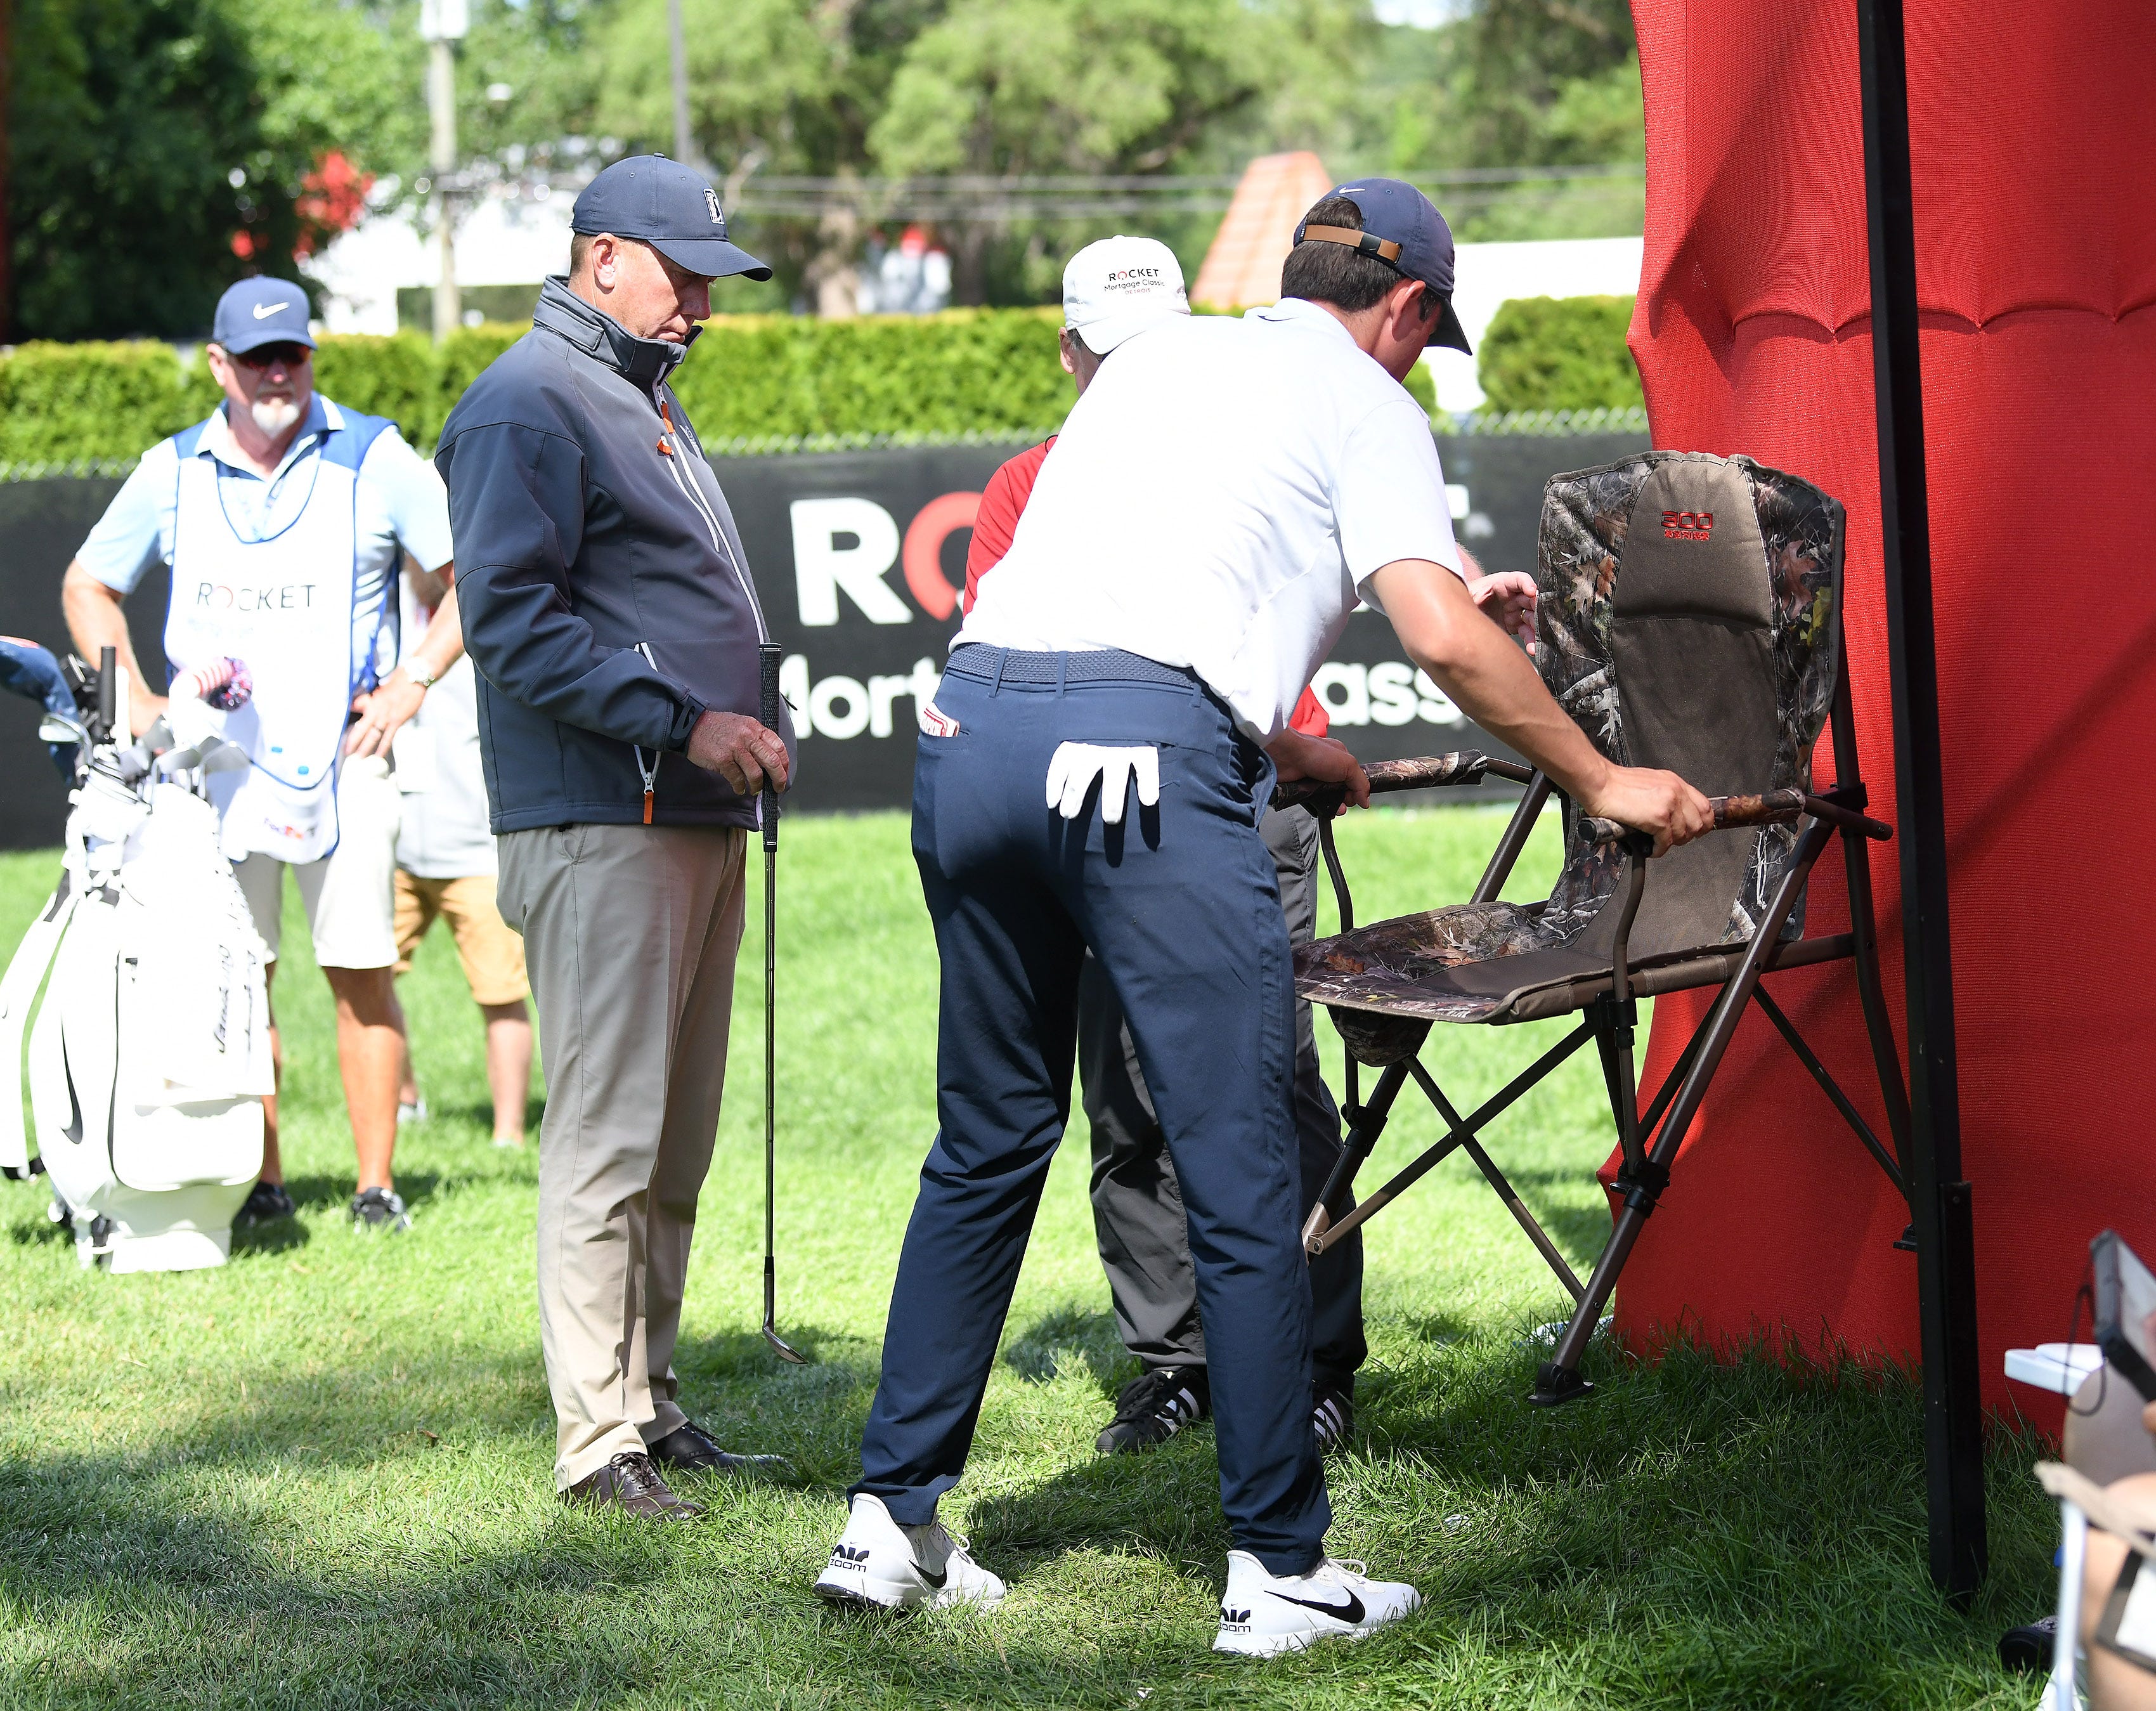 After consulting with PGA official, at left, Davis Thompson moves the chair that his ball rolled under on the ninth green.